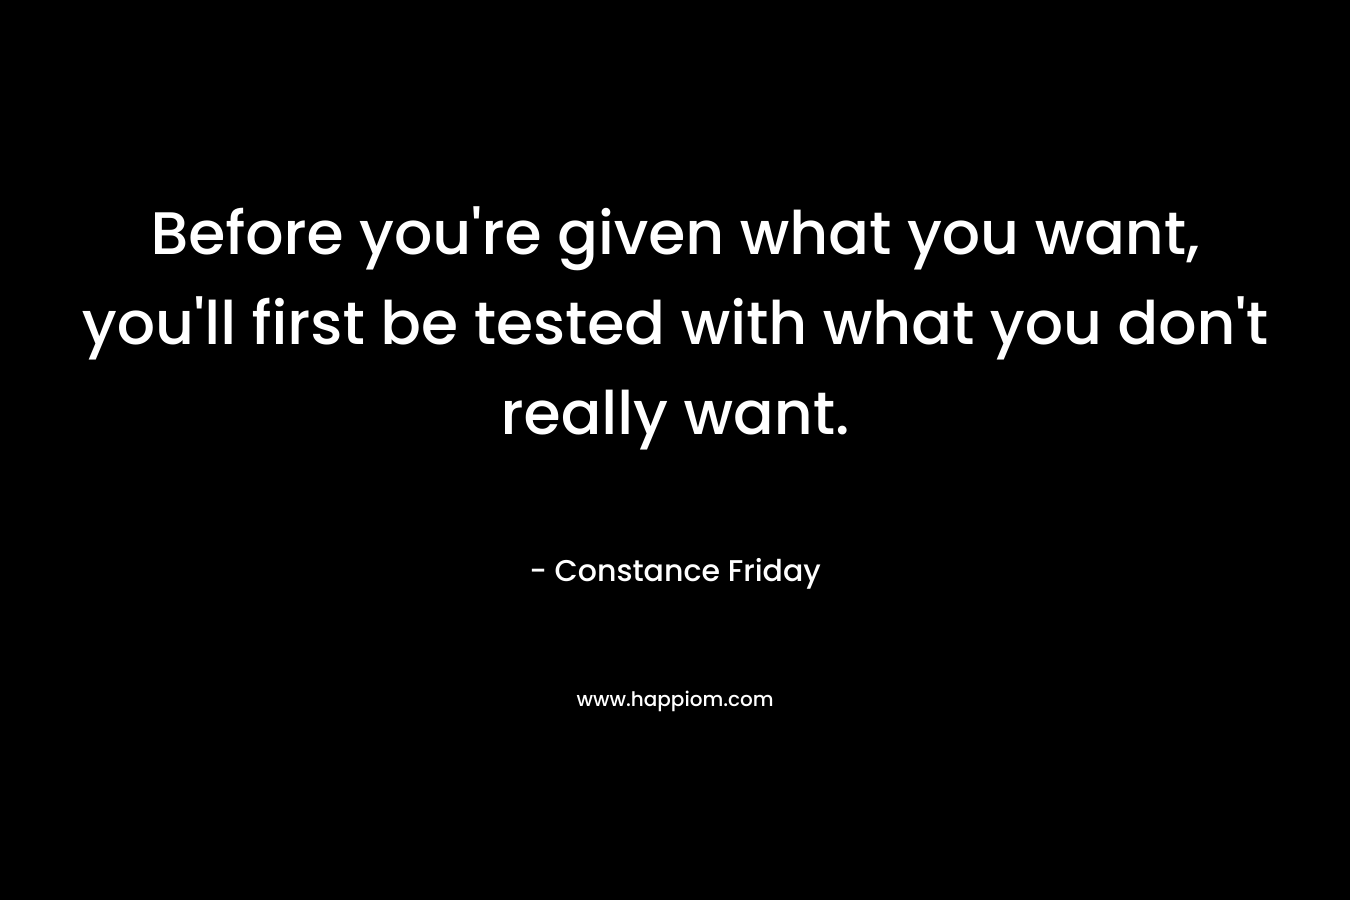 Before you’re given what you want, you’ll first be tested with what you don’t really want. – Constance Friday